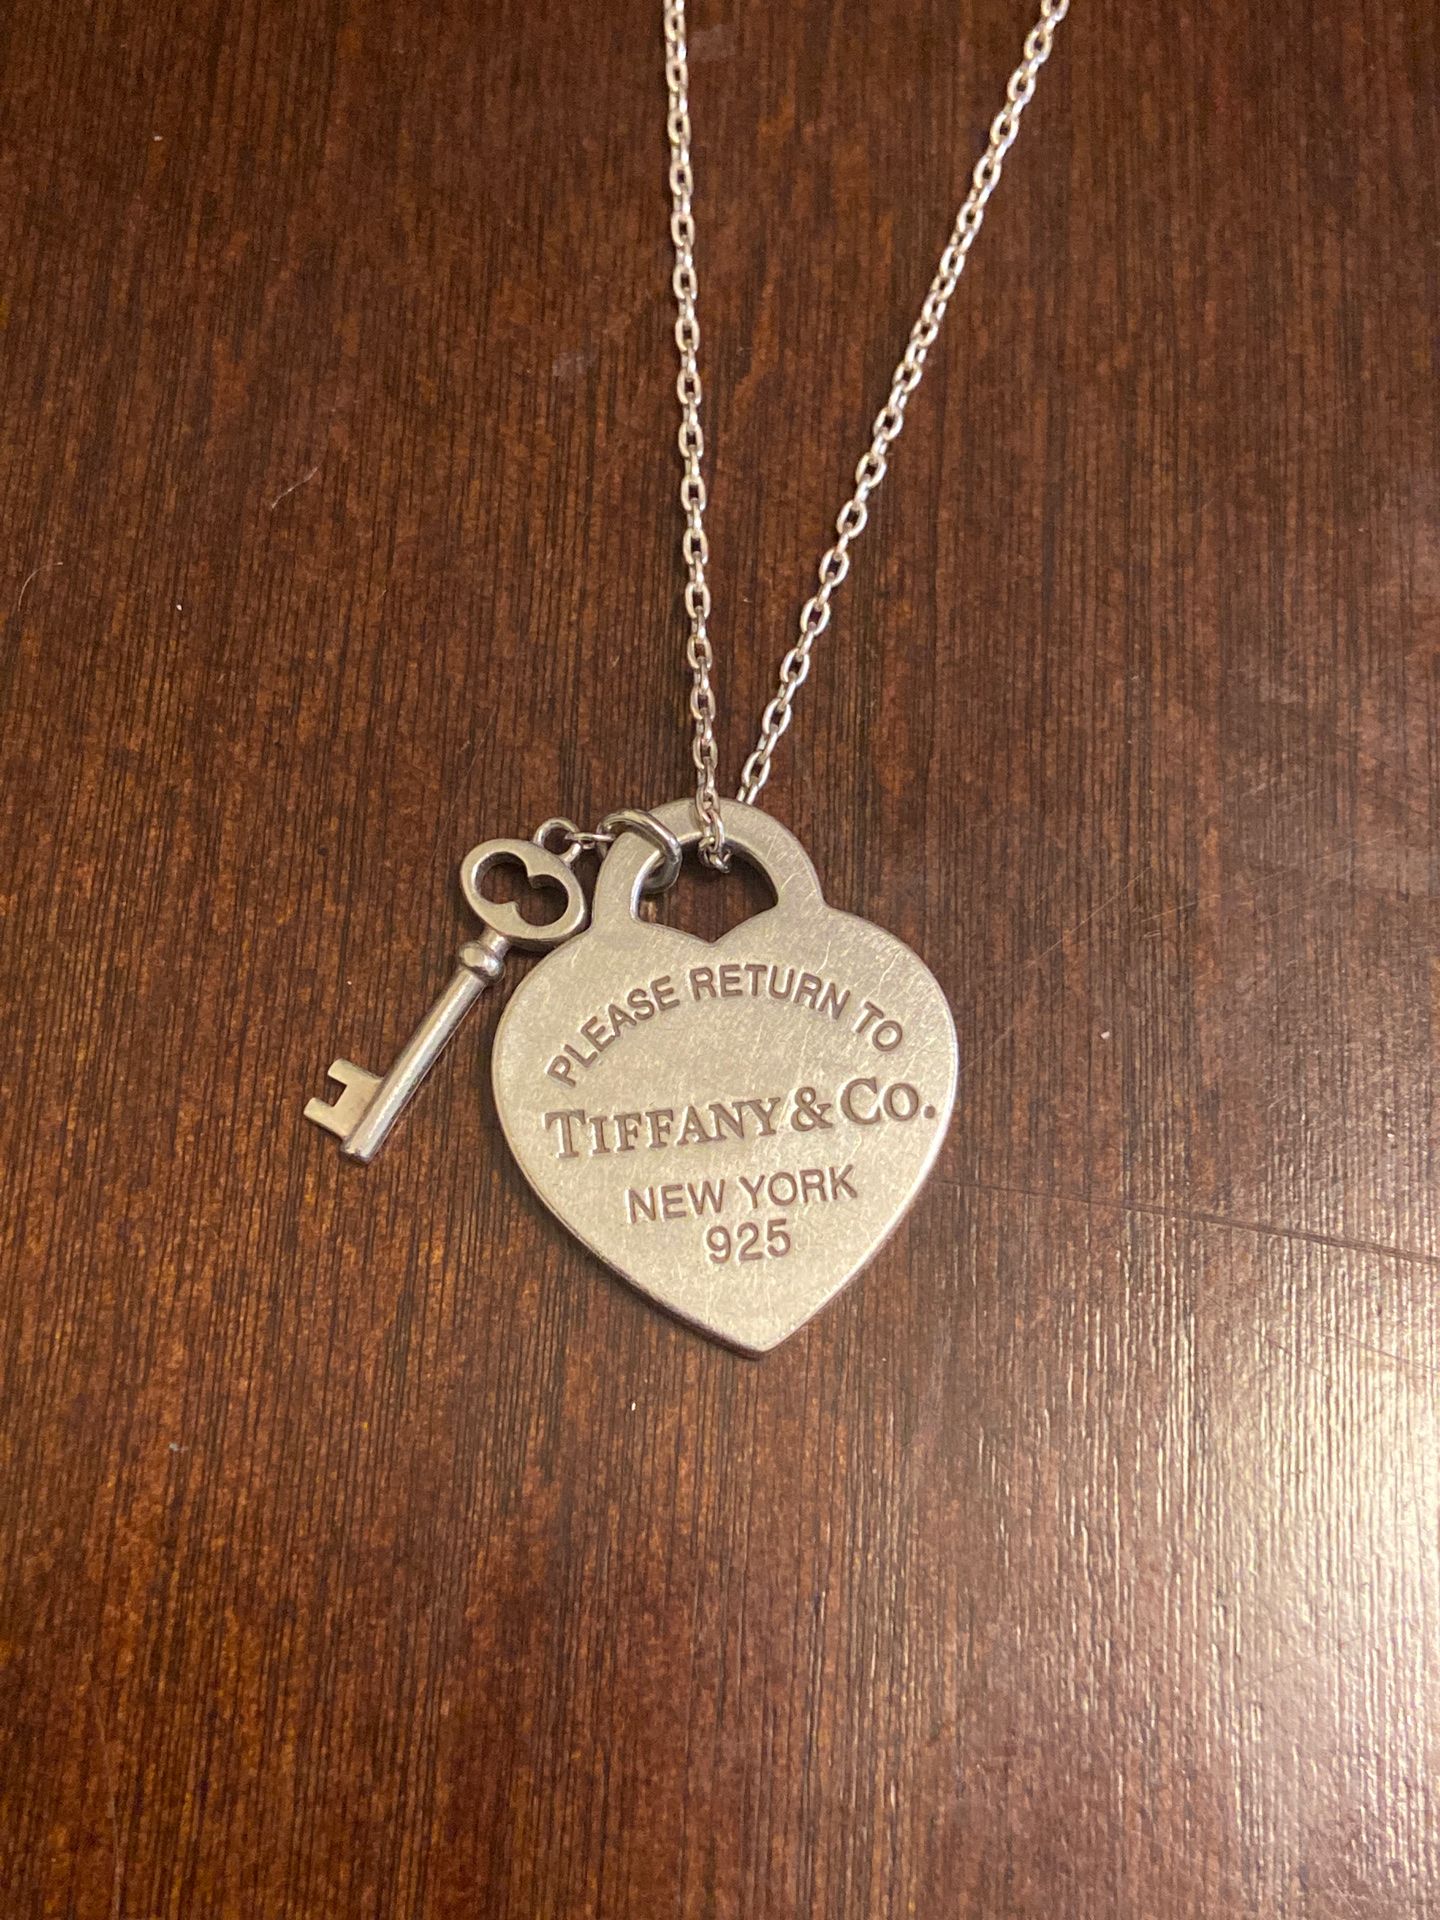 Tiffany and co heart tag pendant with chain